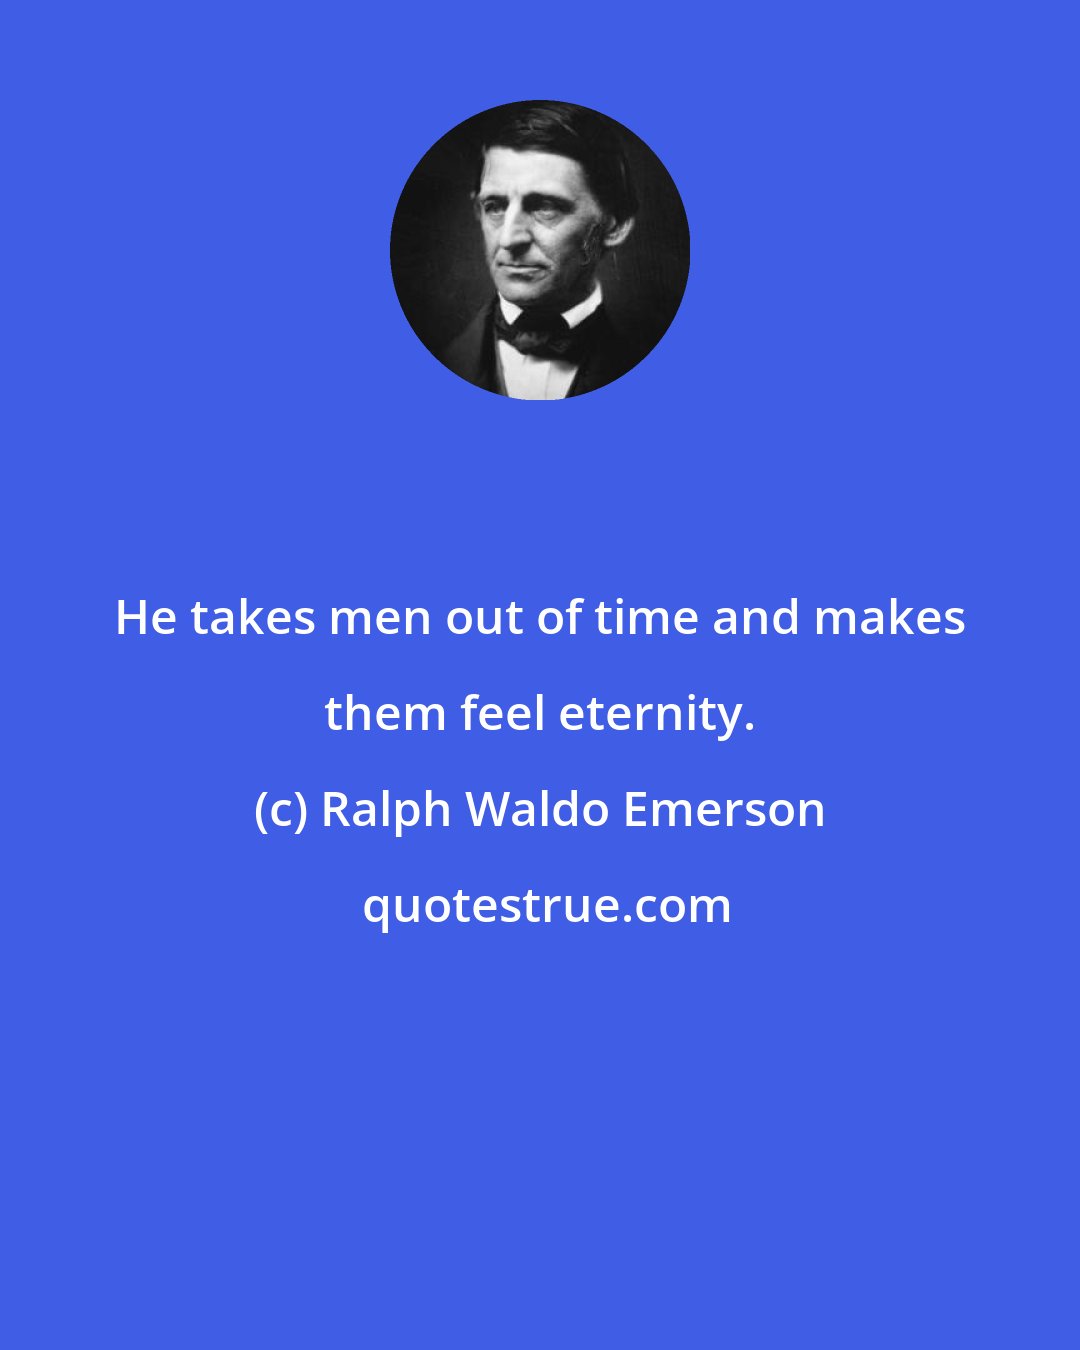 Ralph Waldo Emerson: He takes men out of time and makes them feel eternity.